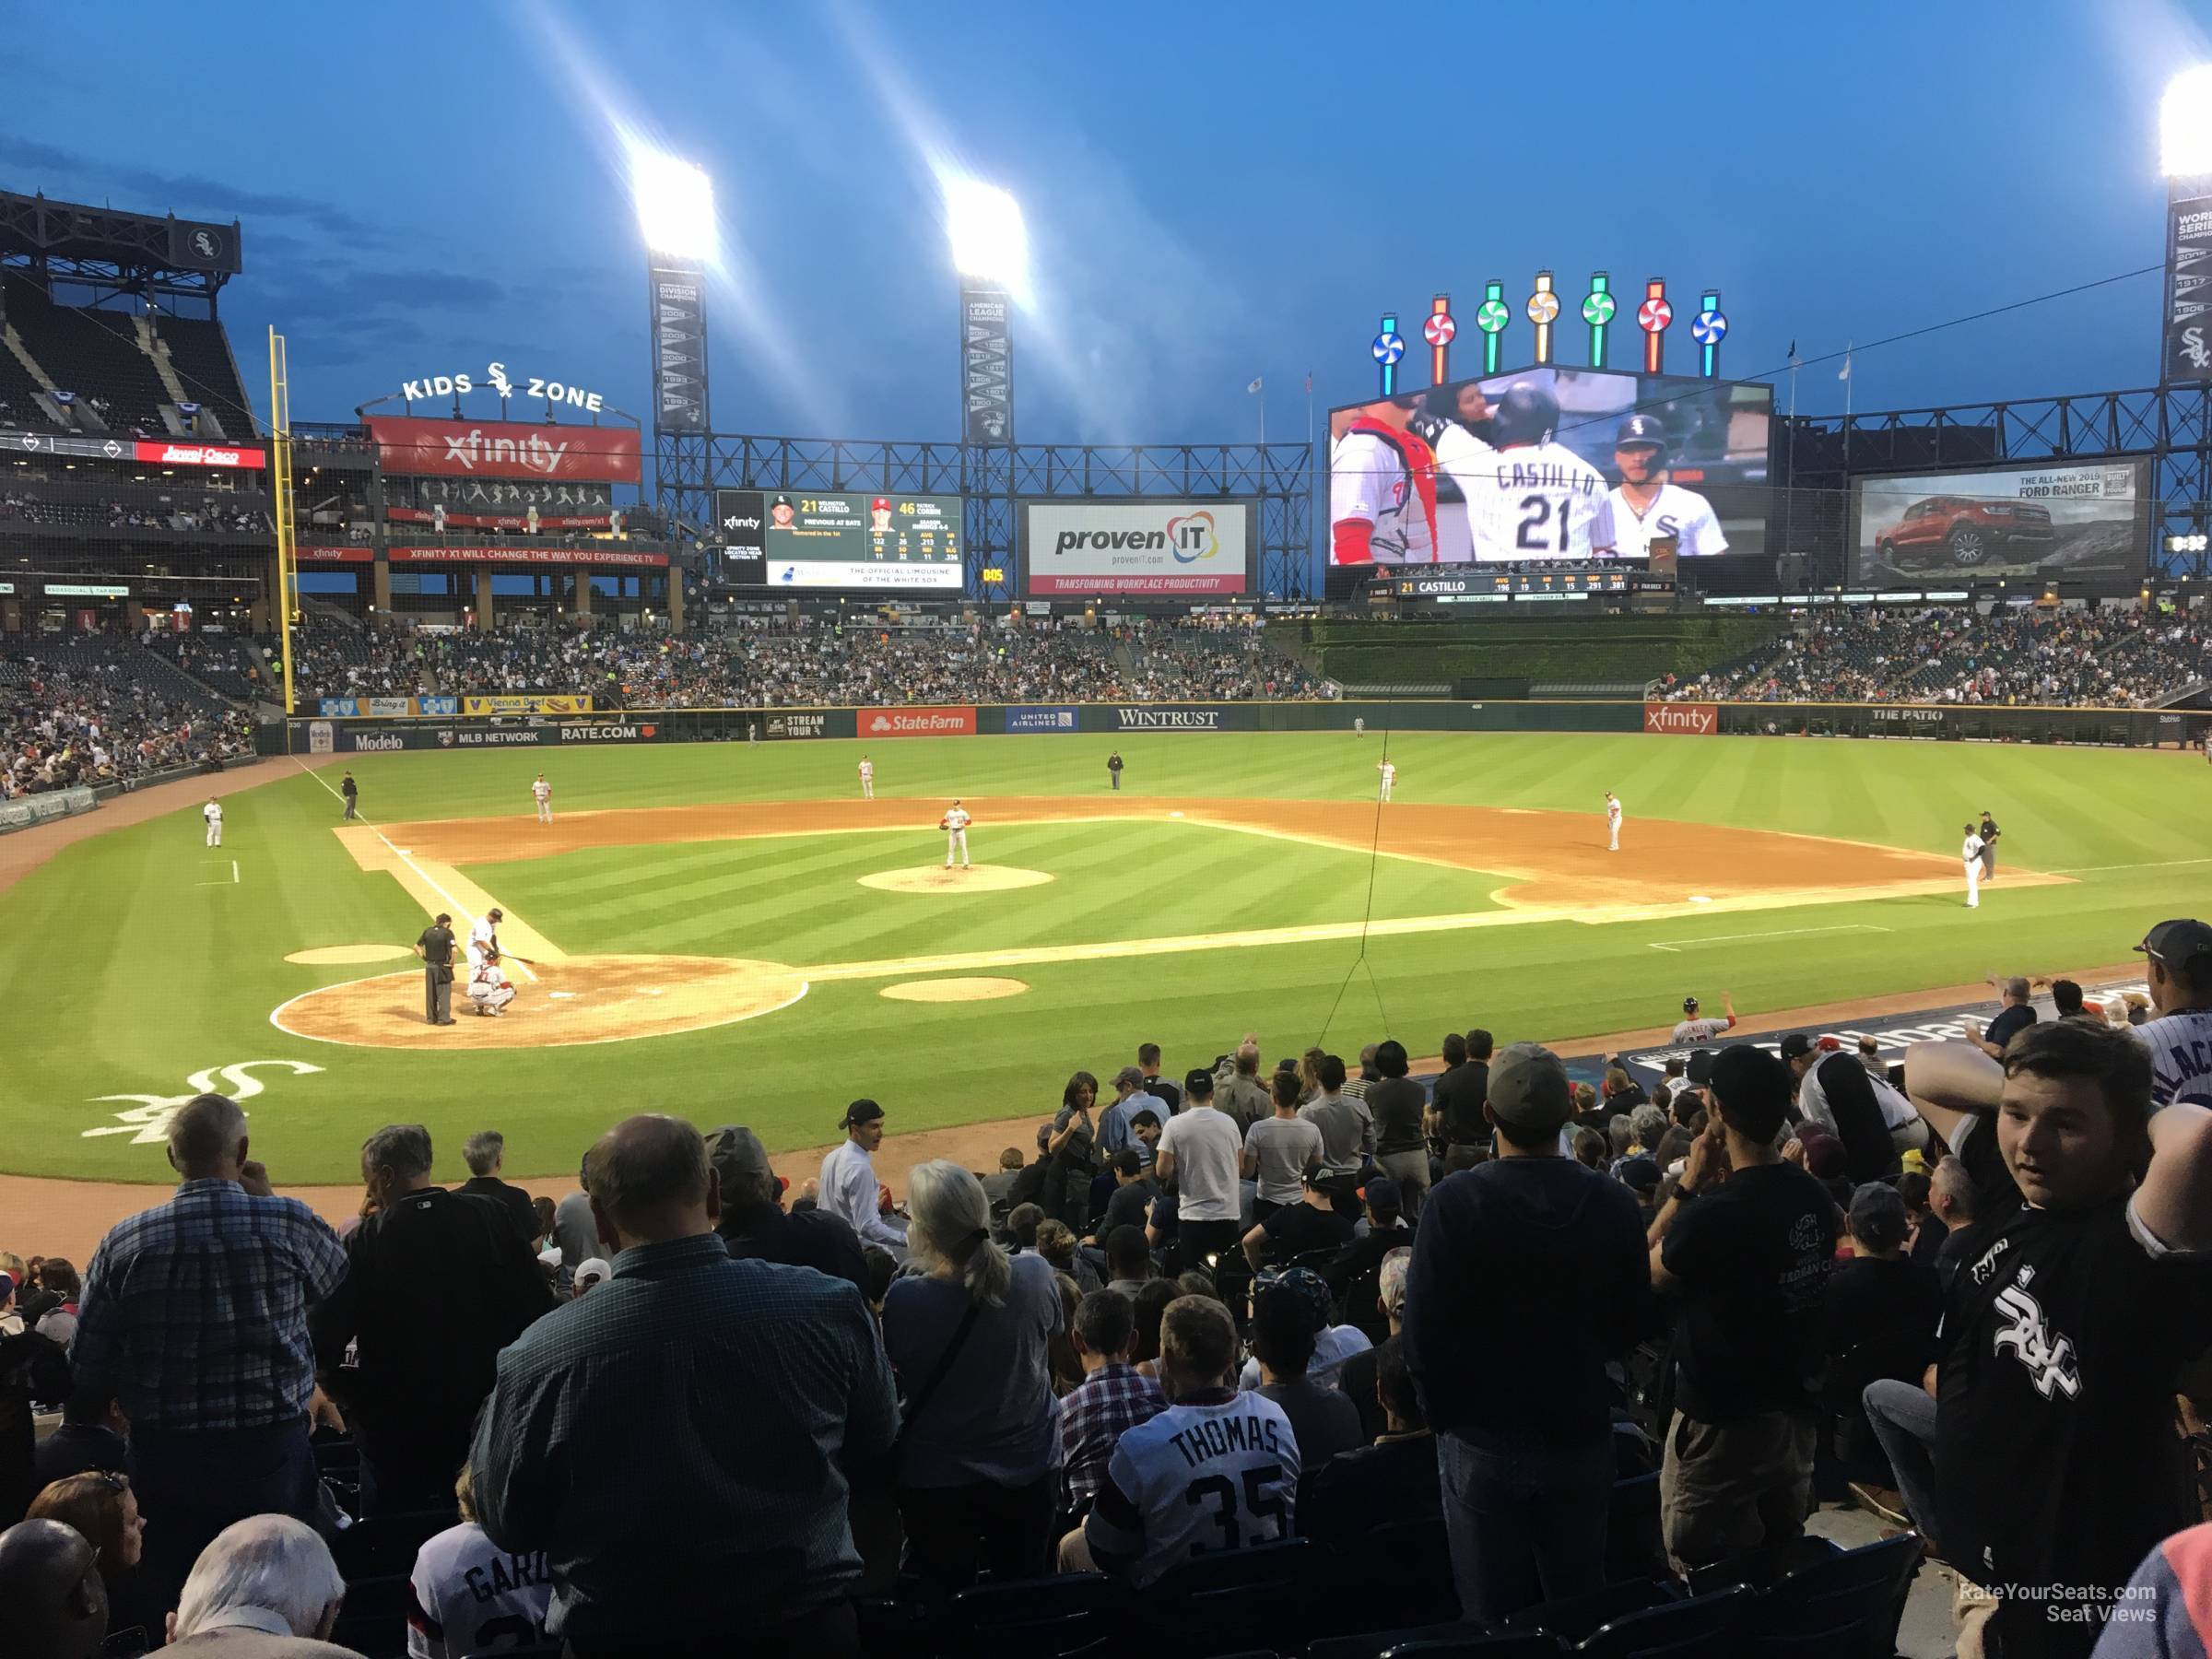 section 129, row 24 seat view  - guaranteed rate field